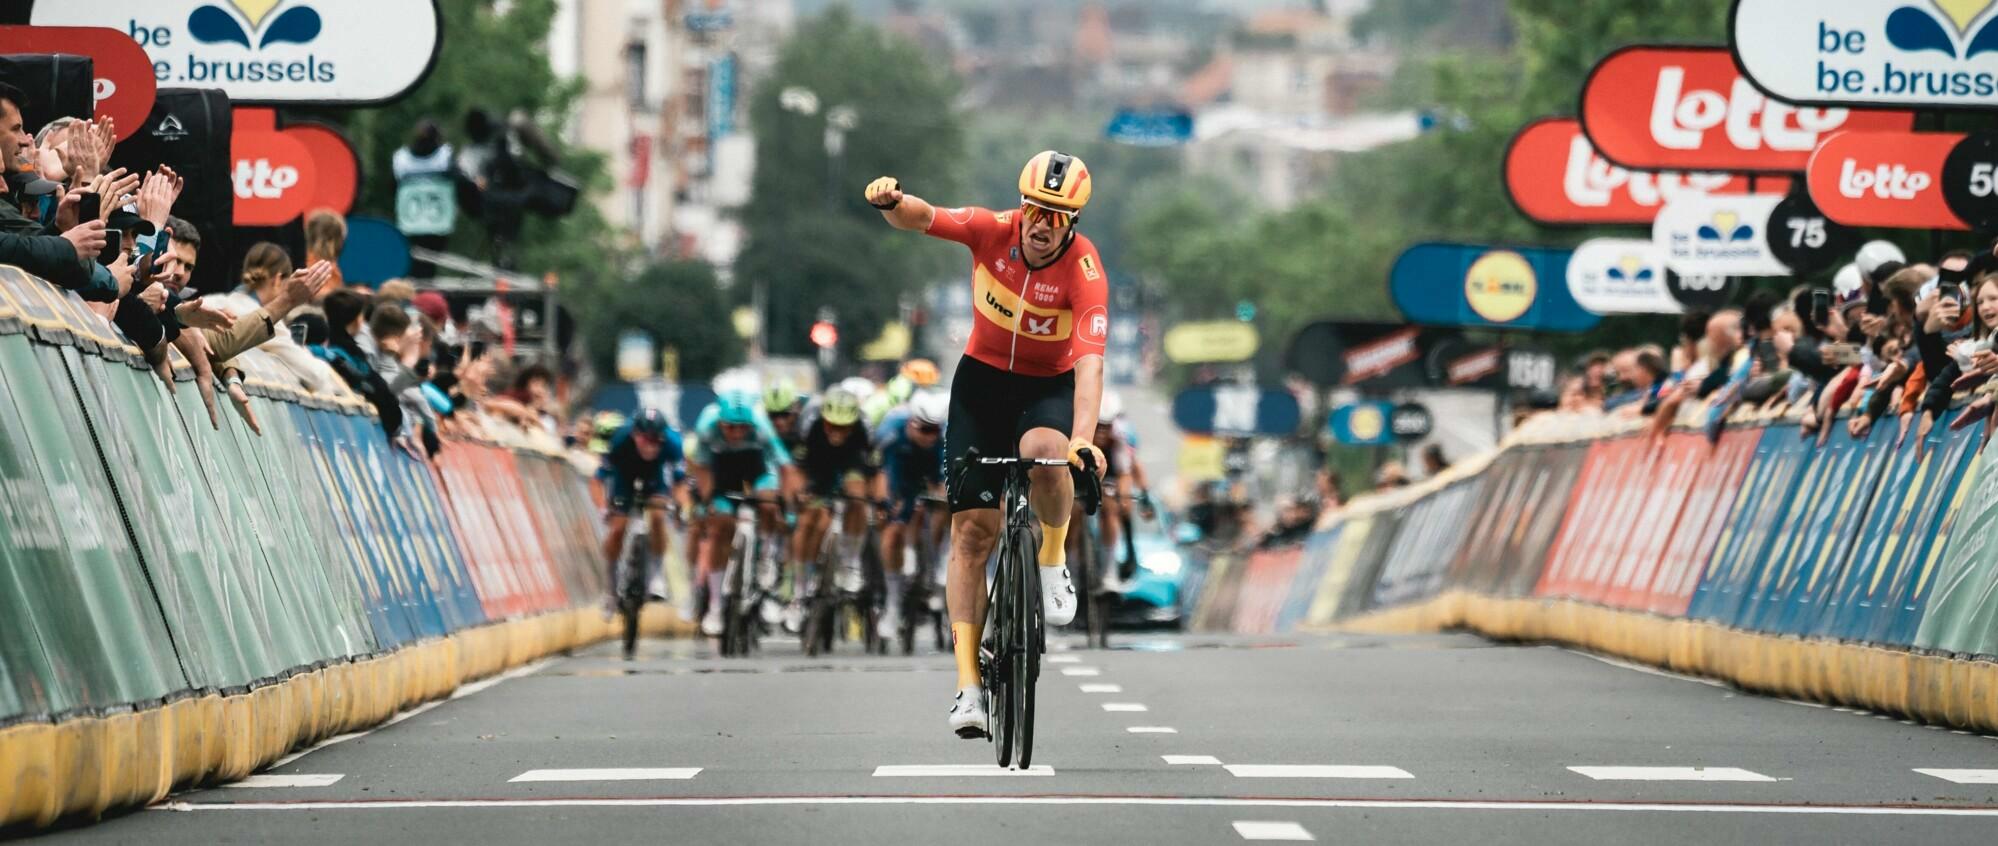 Abrahamsen keeps the peloton at bay and finishes solo in Brussels Cycling Classic